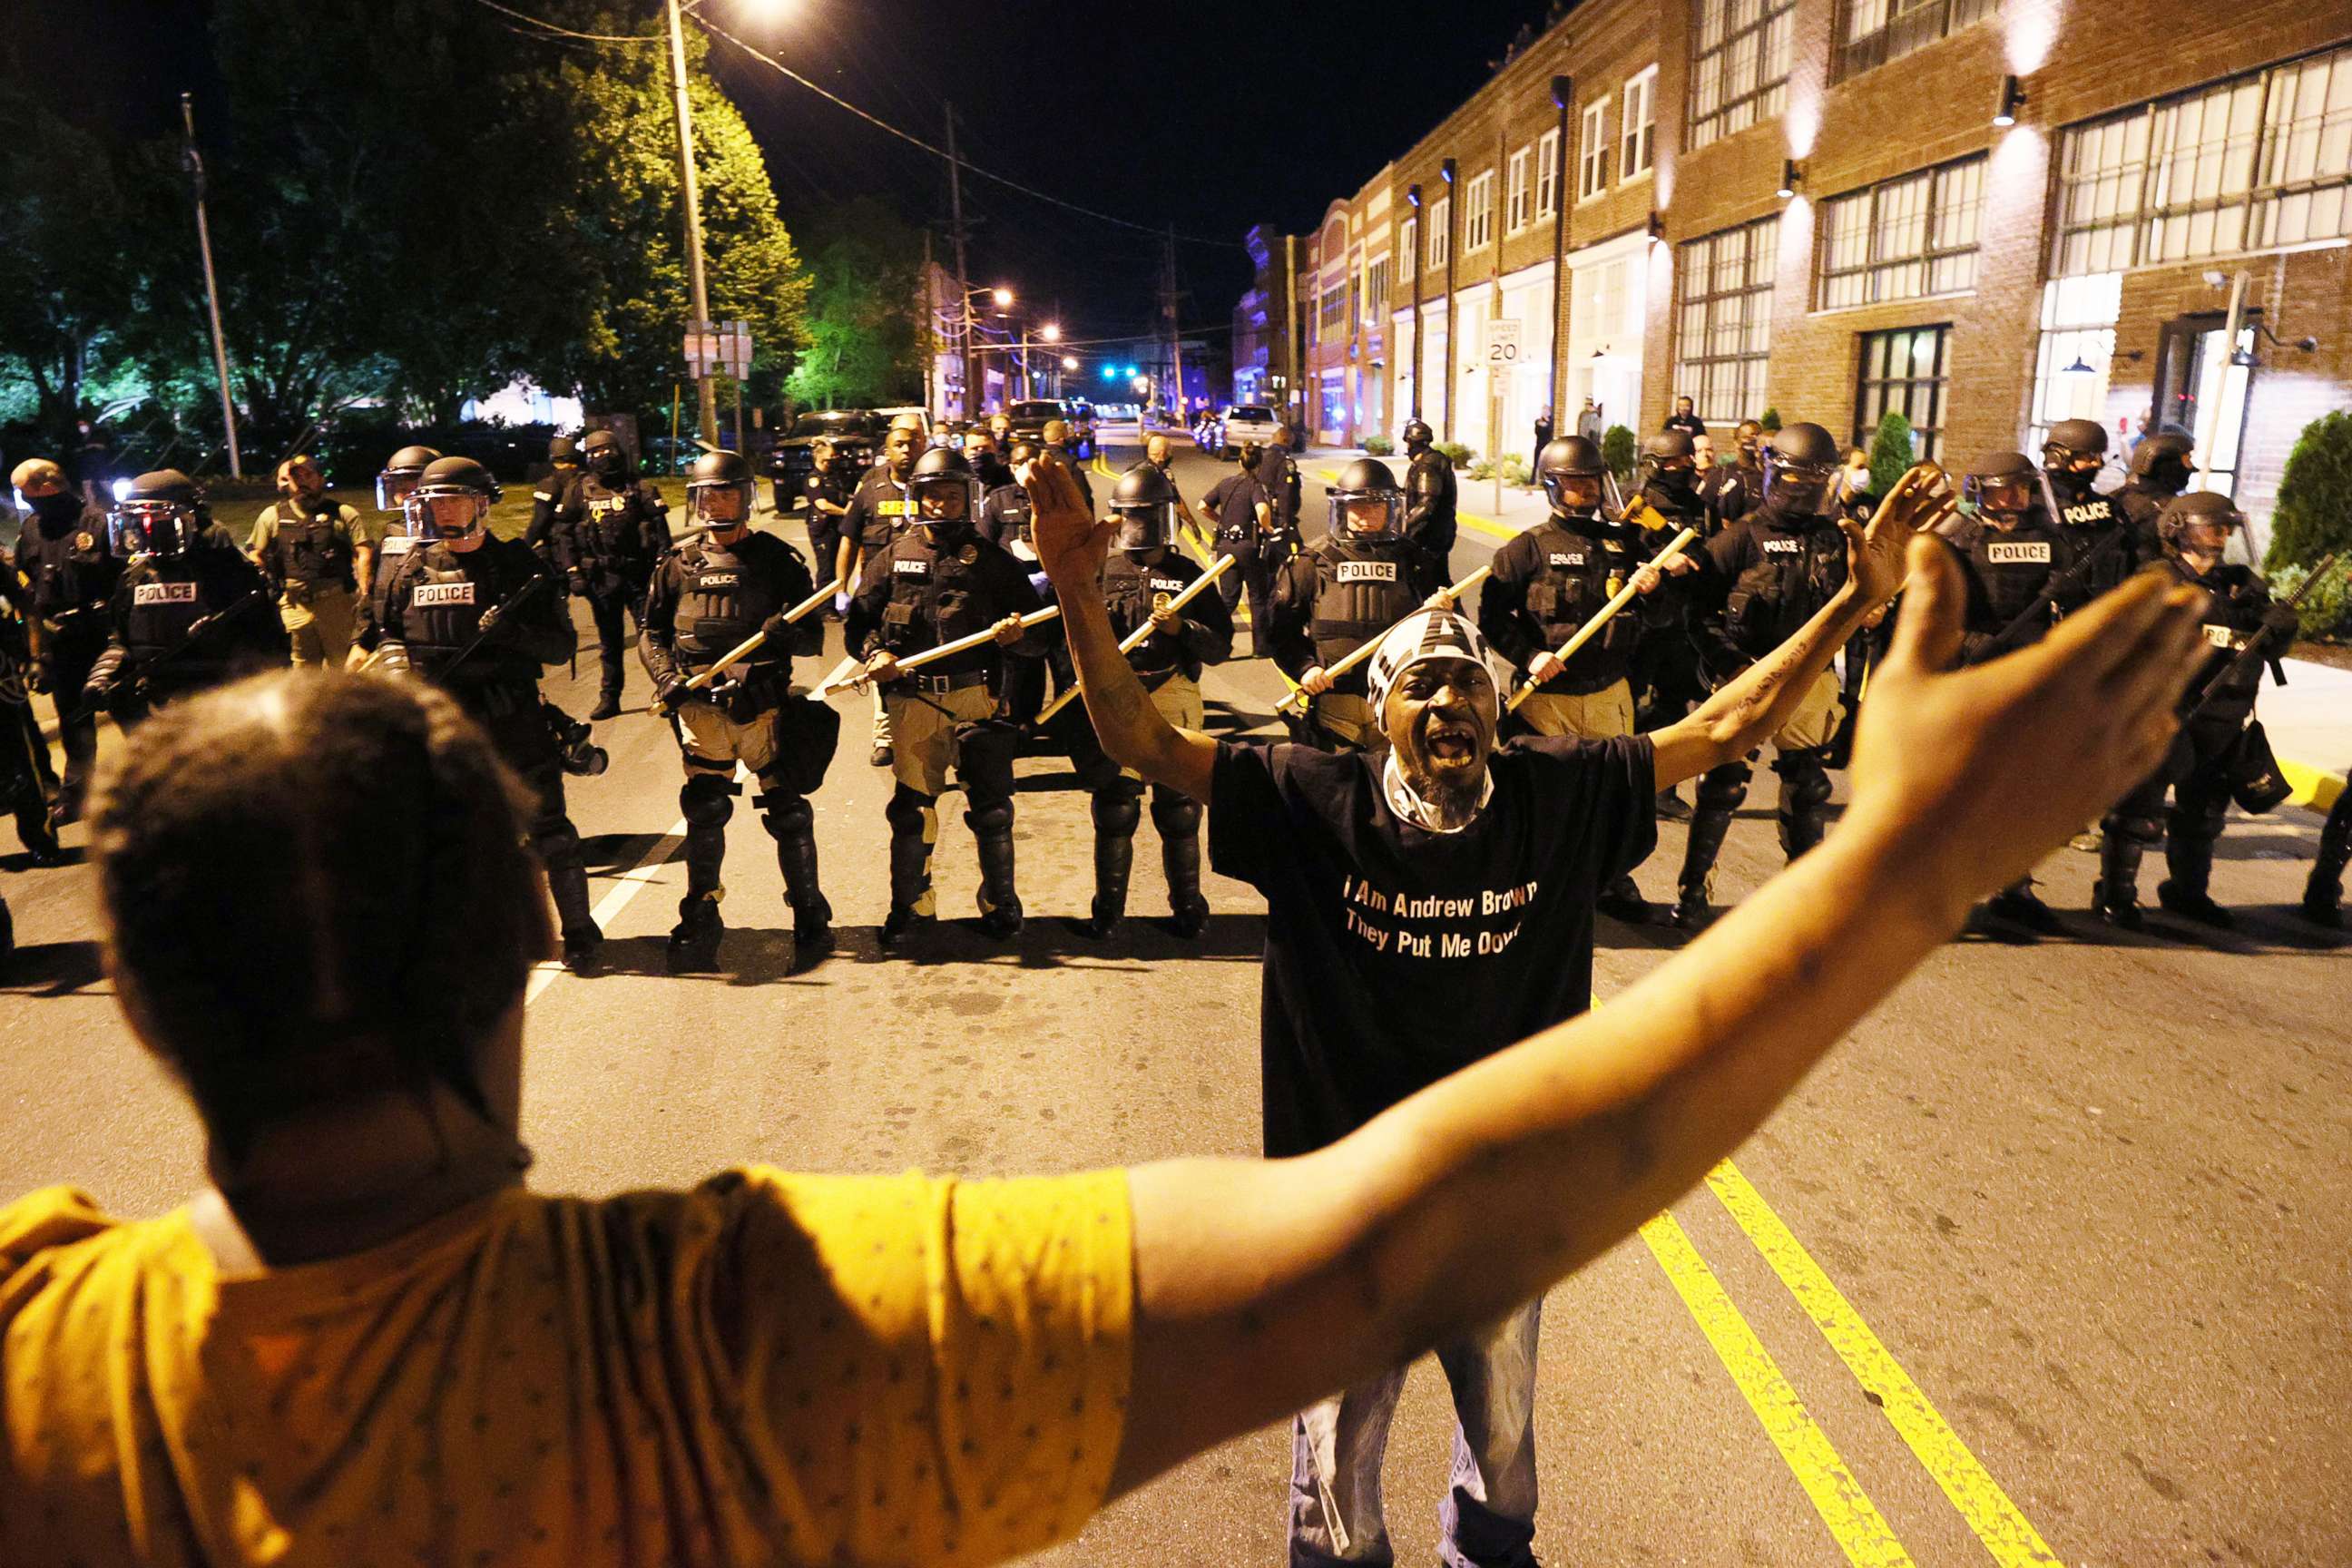 PHOTO: Police in riot gear force people off a street as they protest the killing of Andrew Brown Jr., April 27, 2021, in Elizabeth City, North Carolina.